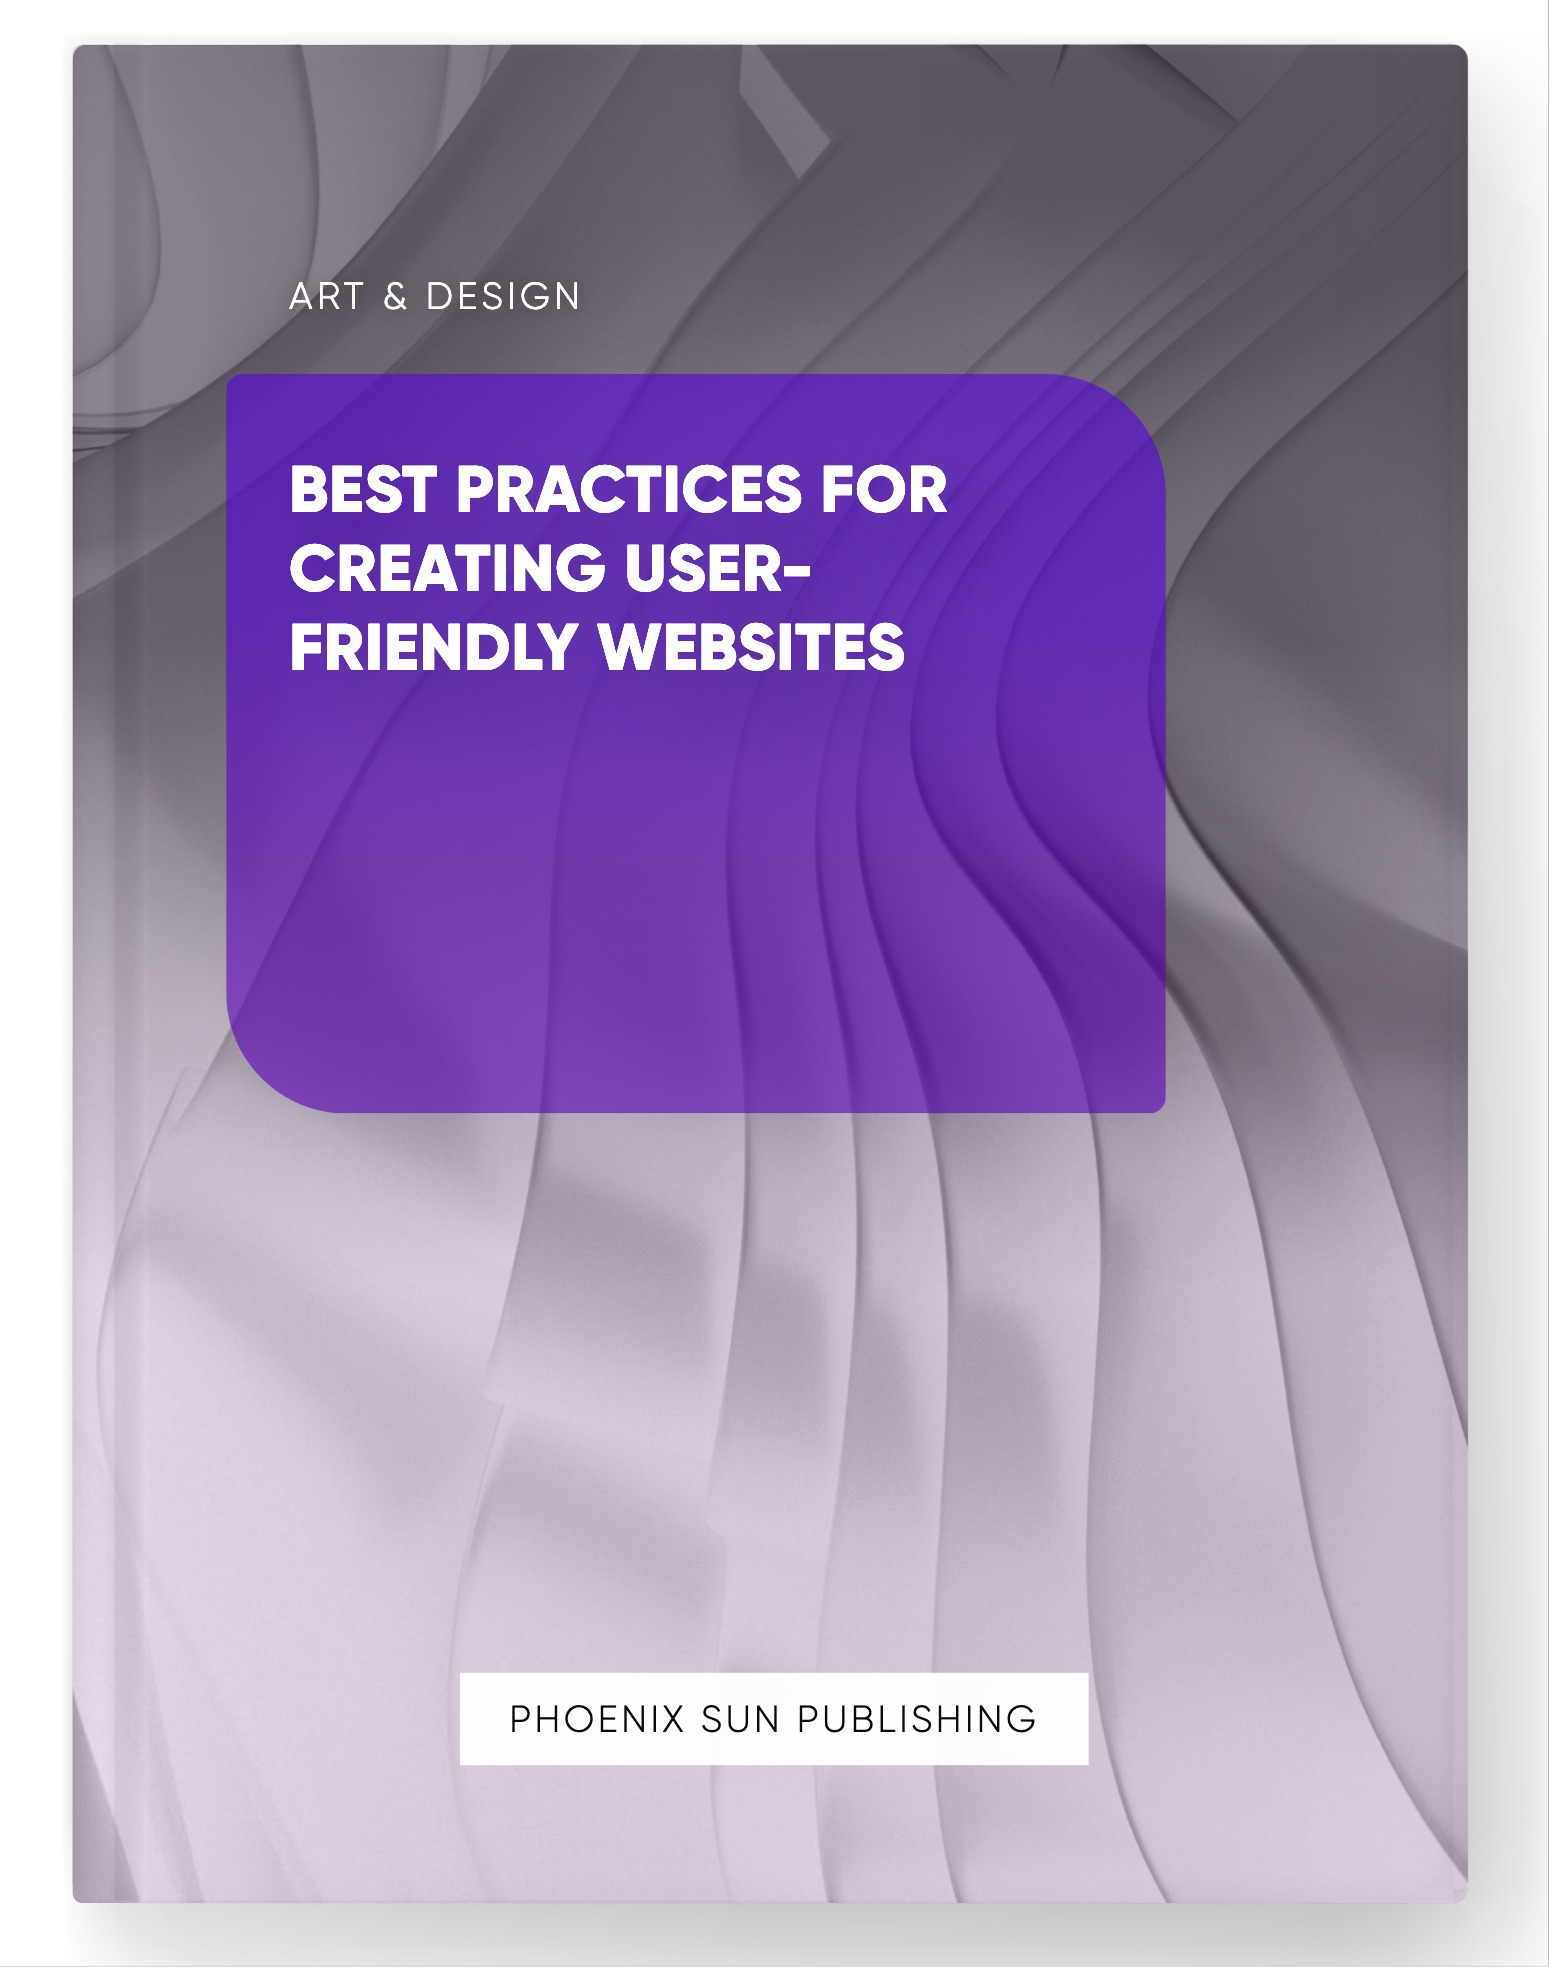 Best Practices for Creating User-Friendly Websites